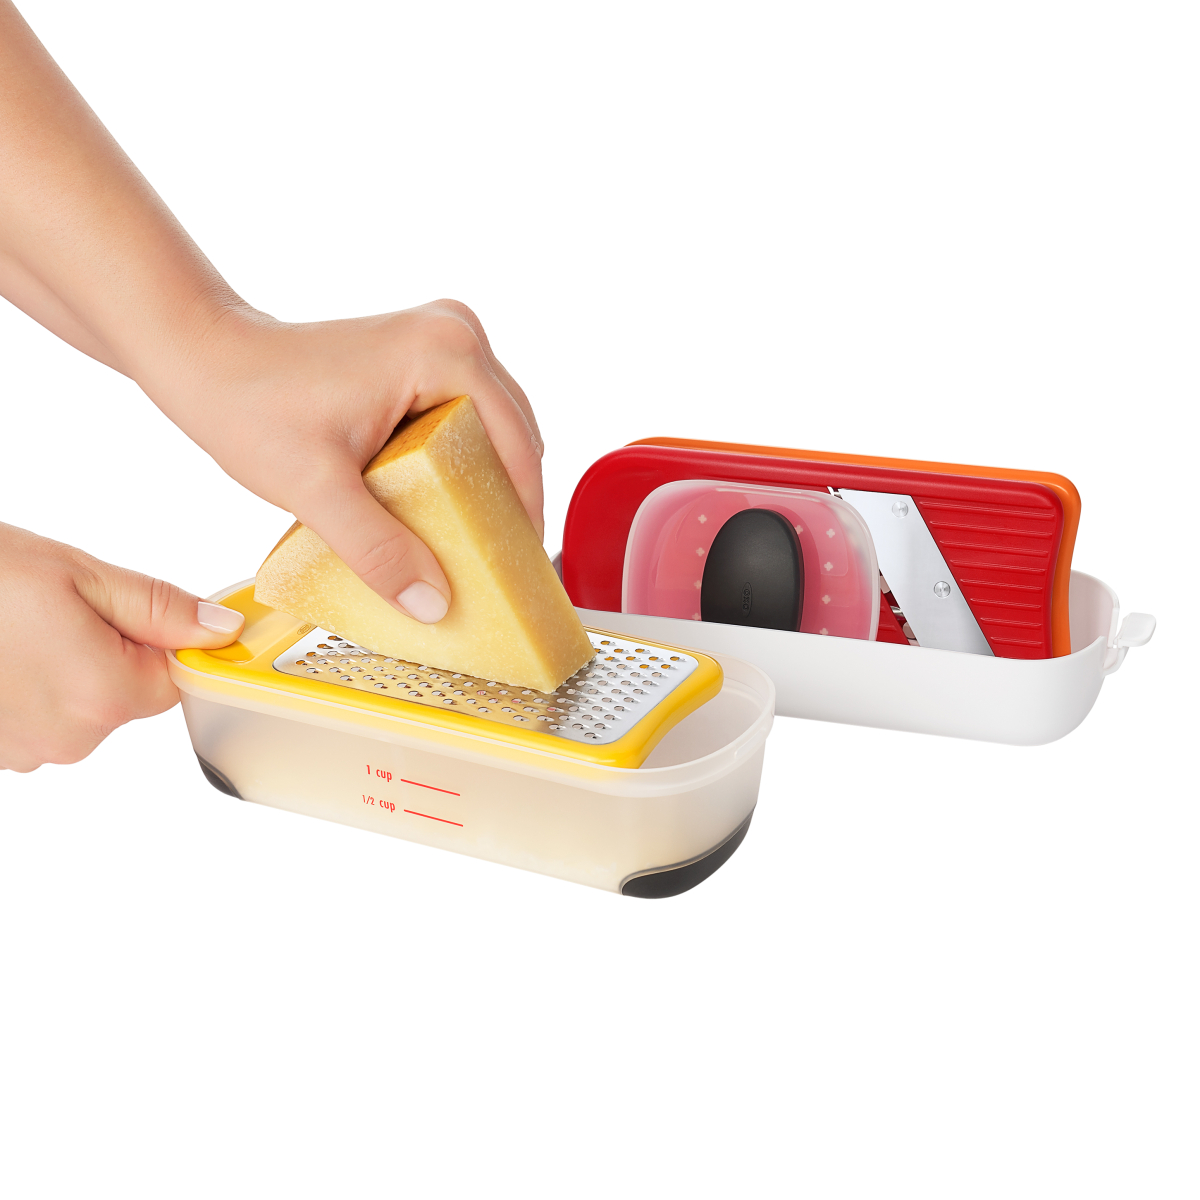 https://www.containerstore.com/catalogimages/465250/100760870-OXO-Mini-Grate-Slice-VEN11.jpg